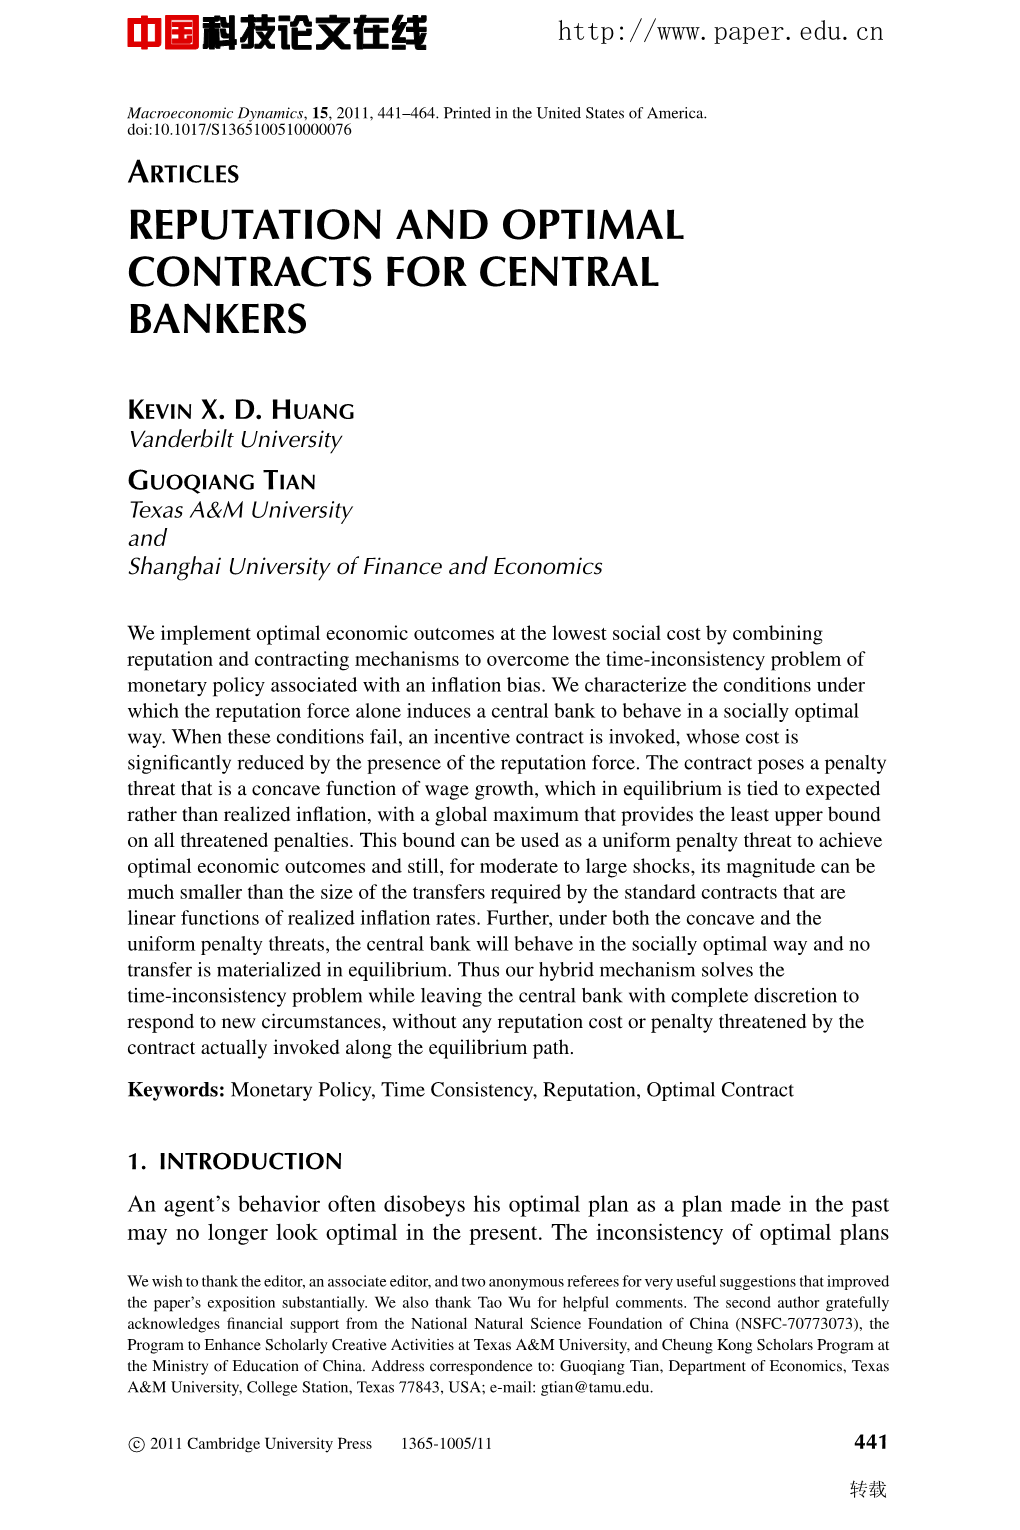 Reputation and Optimal Contracts for Central Bankers